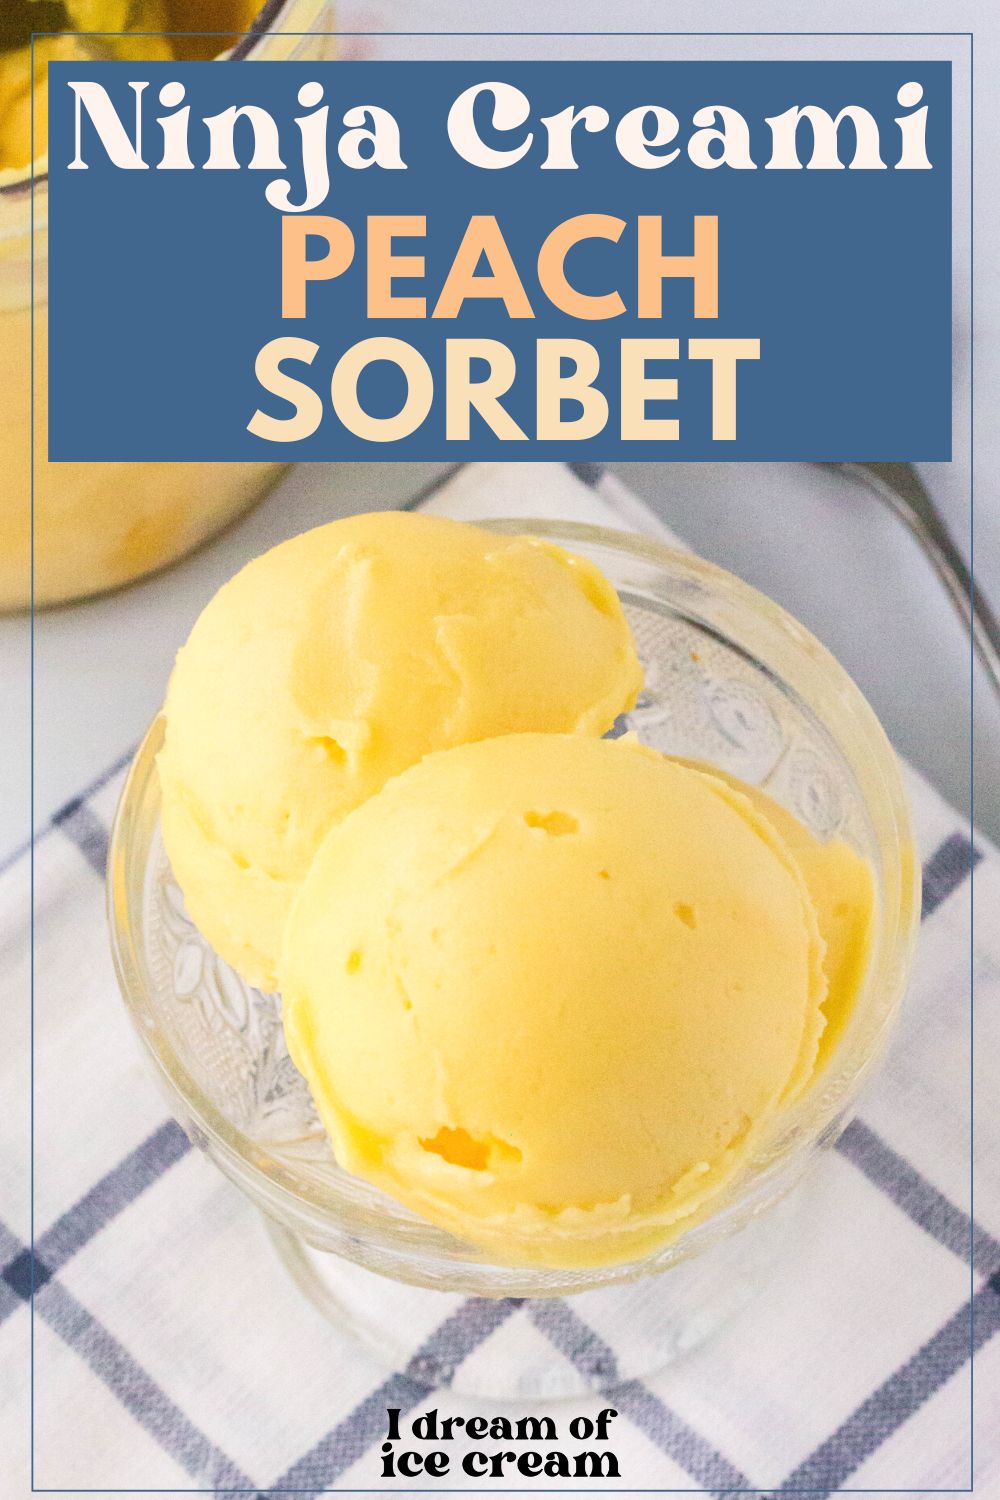 two scoops of Ninja Creami peach sorbet served in a glass dish atop a blue and white napkin.